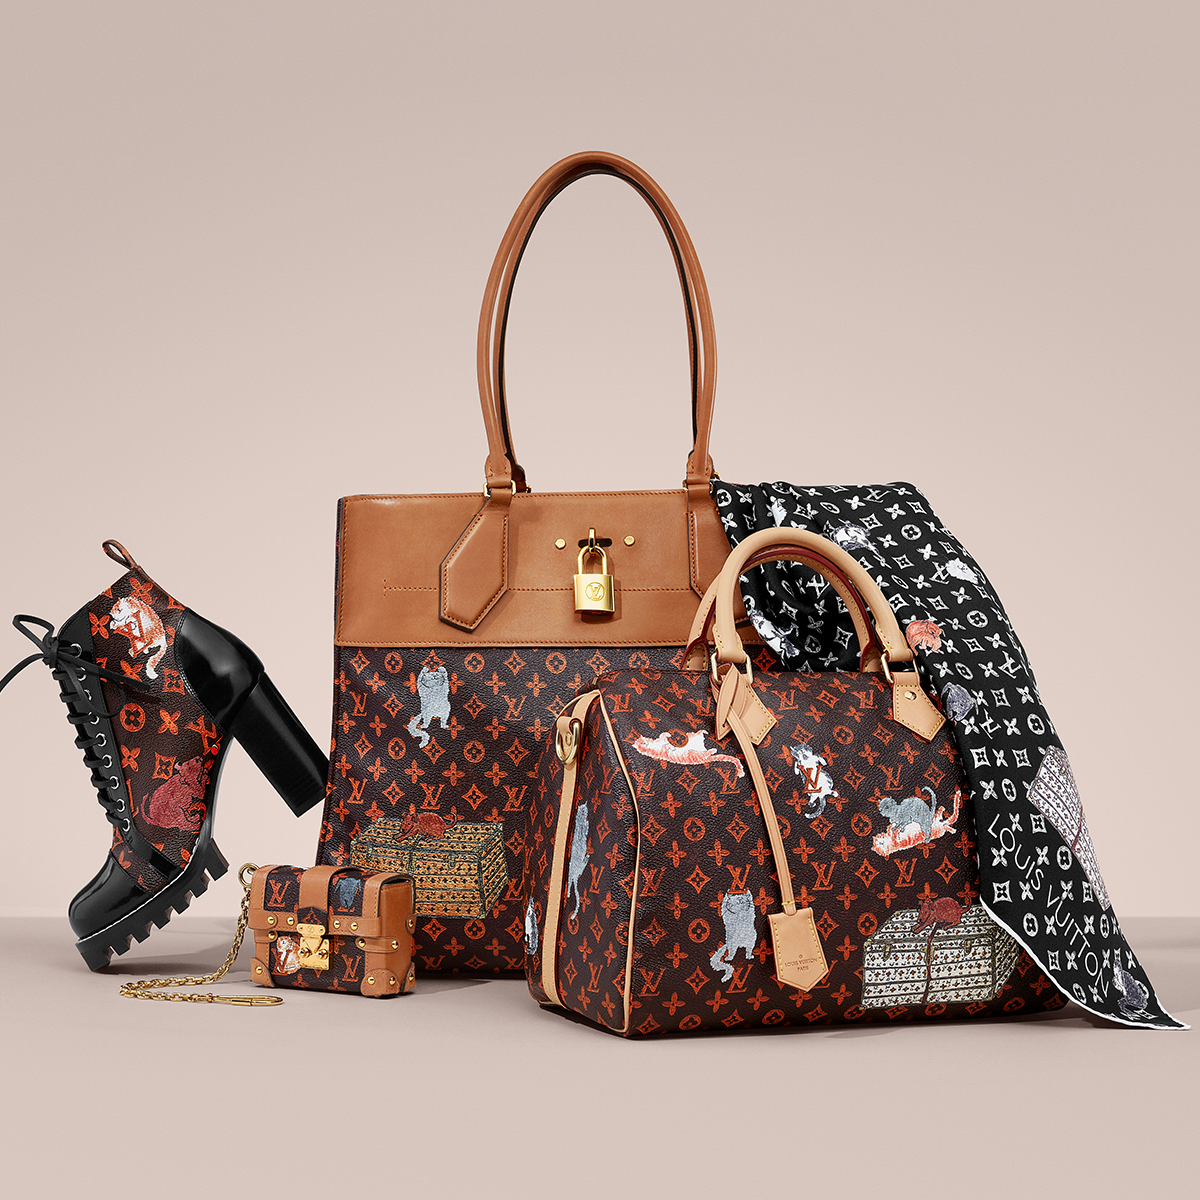 Louis Vuitton has Launched the Most Adorable Collaboration